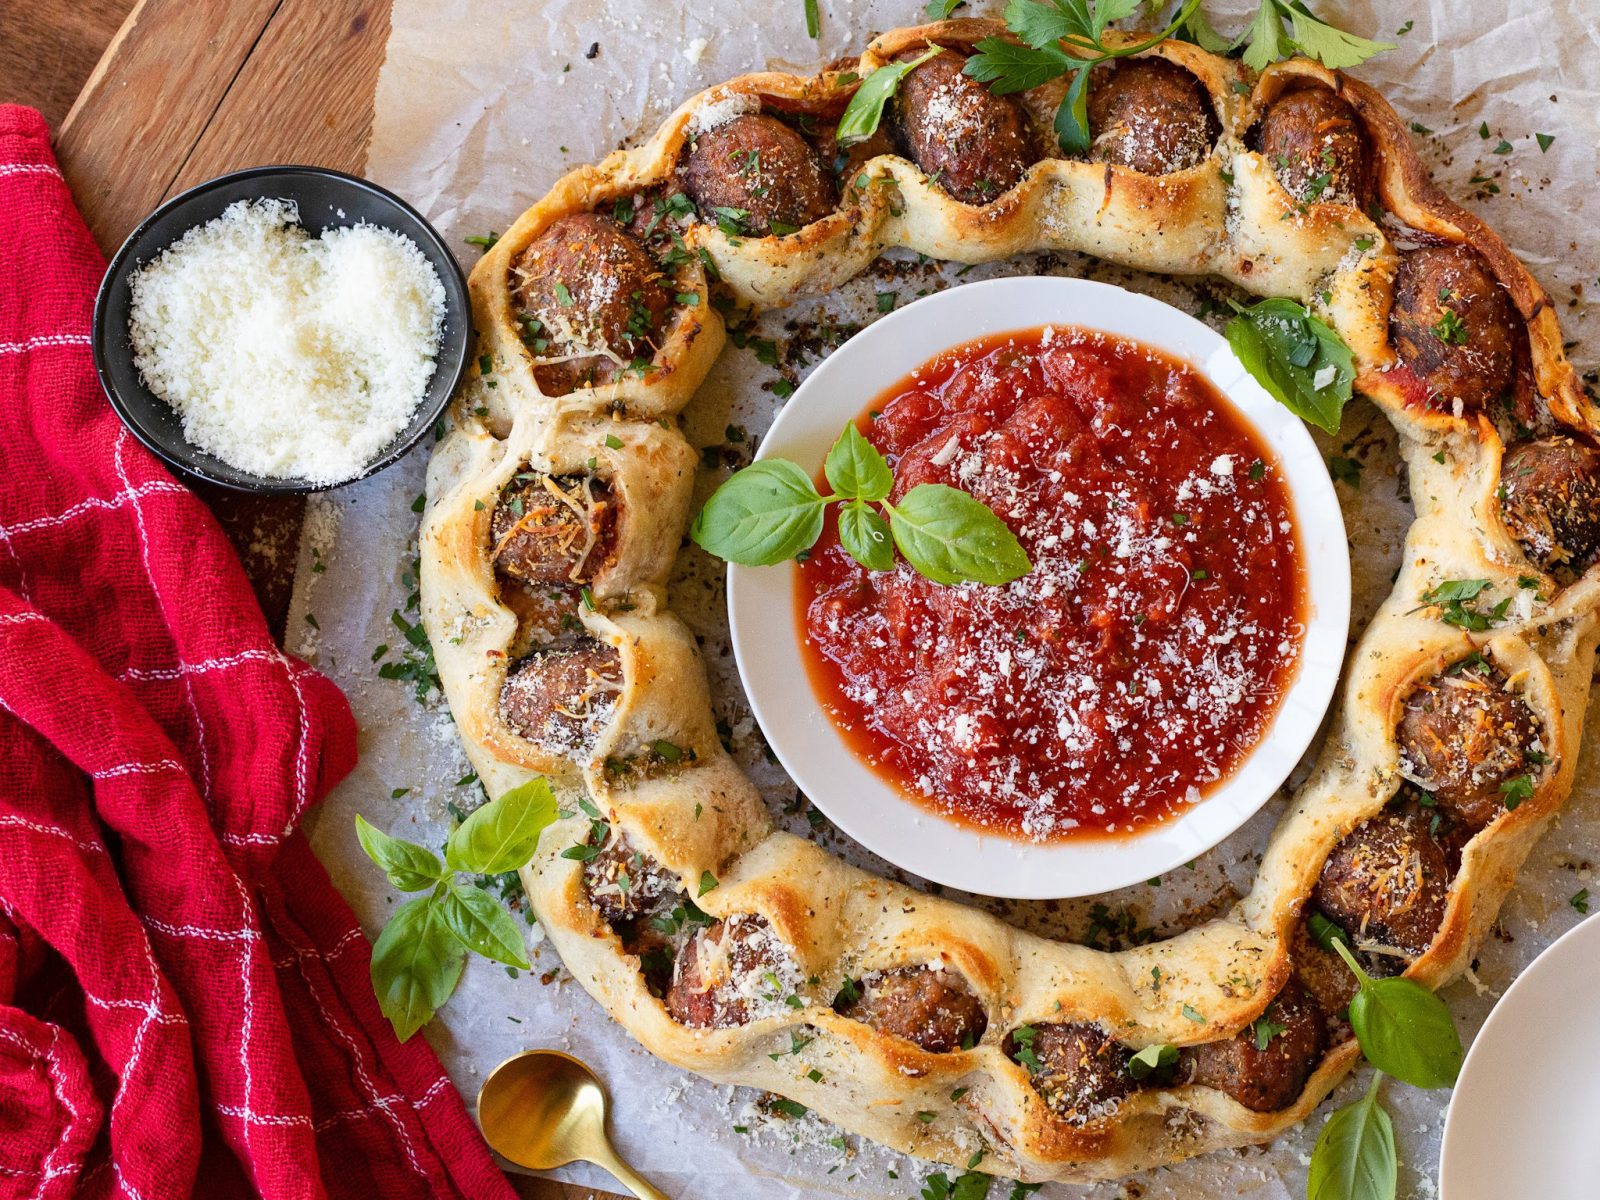 Get Carando® Meatballs and Sausage at Publix – Try With My Meatball Pull-Apart For A Quick And Tasty Weeknight Dinner